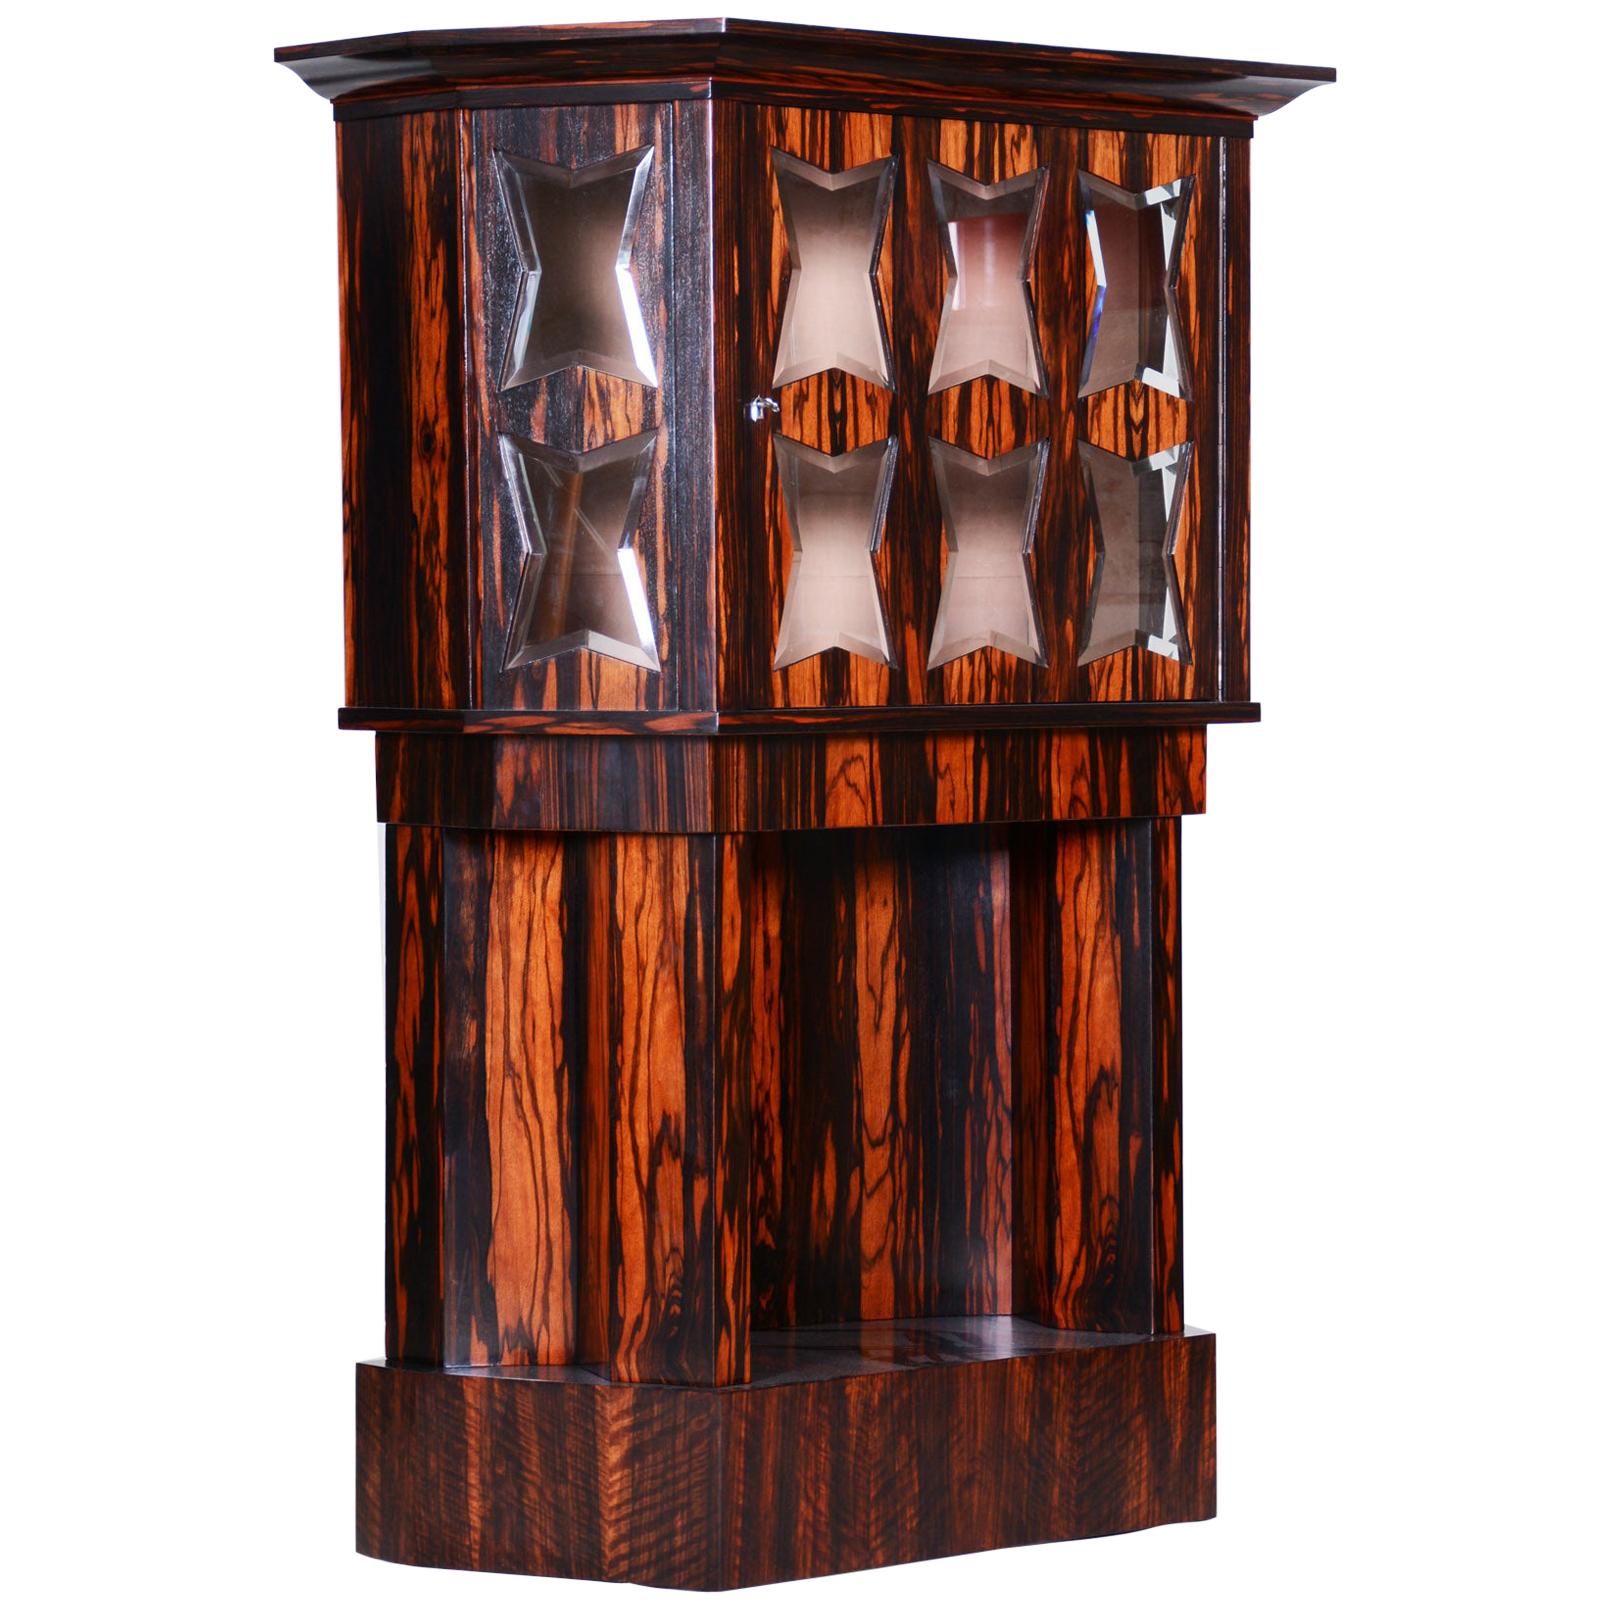 Early 20th Century Cubism Czech Display Cabinet by Pavel Janák, Macassar, 1910s